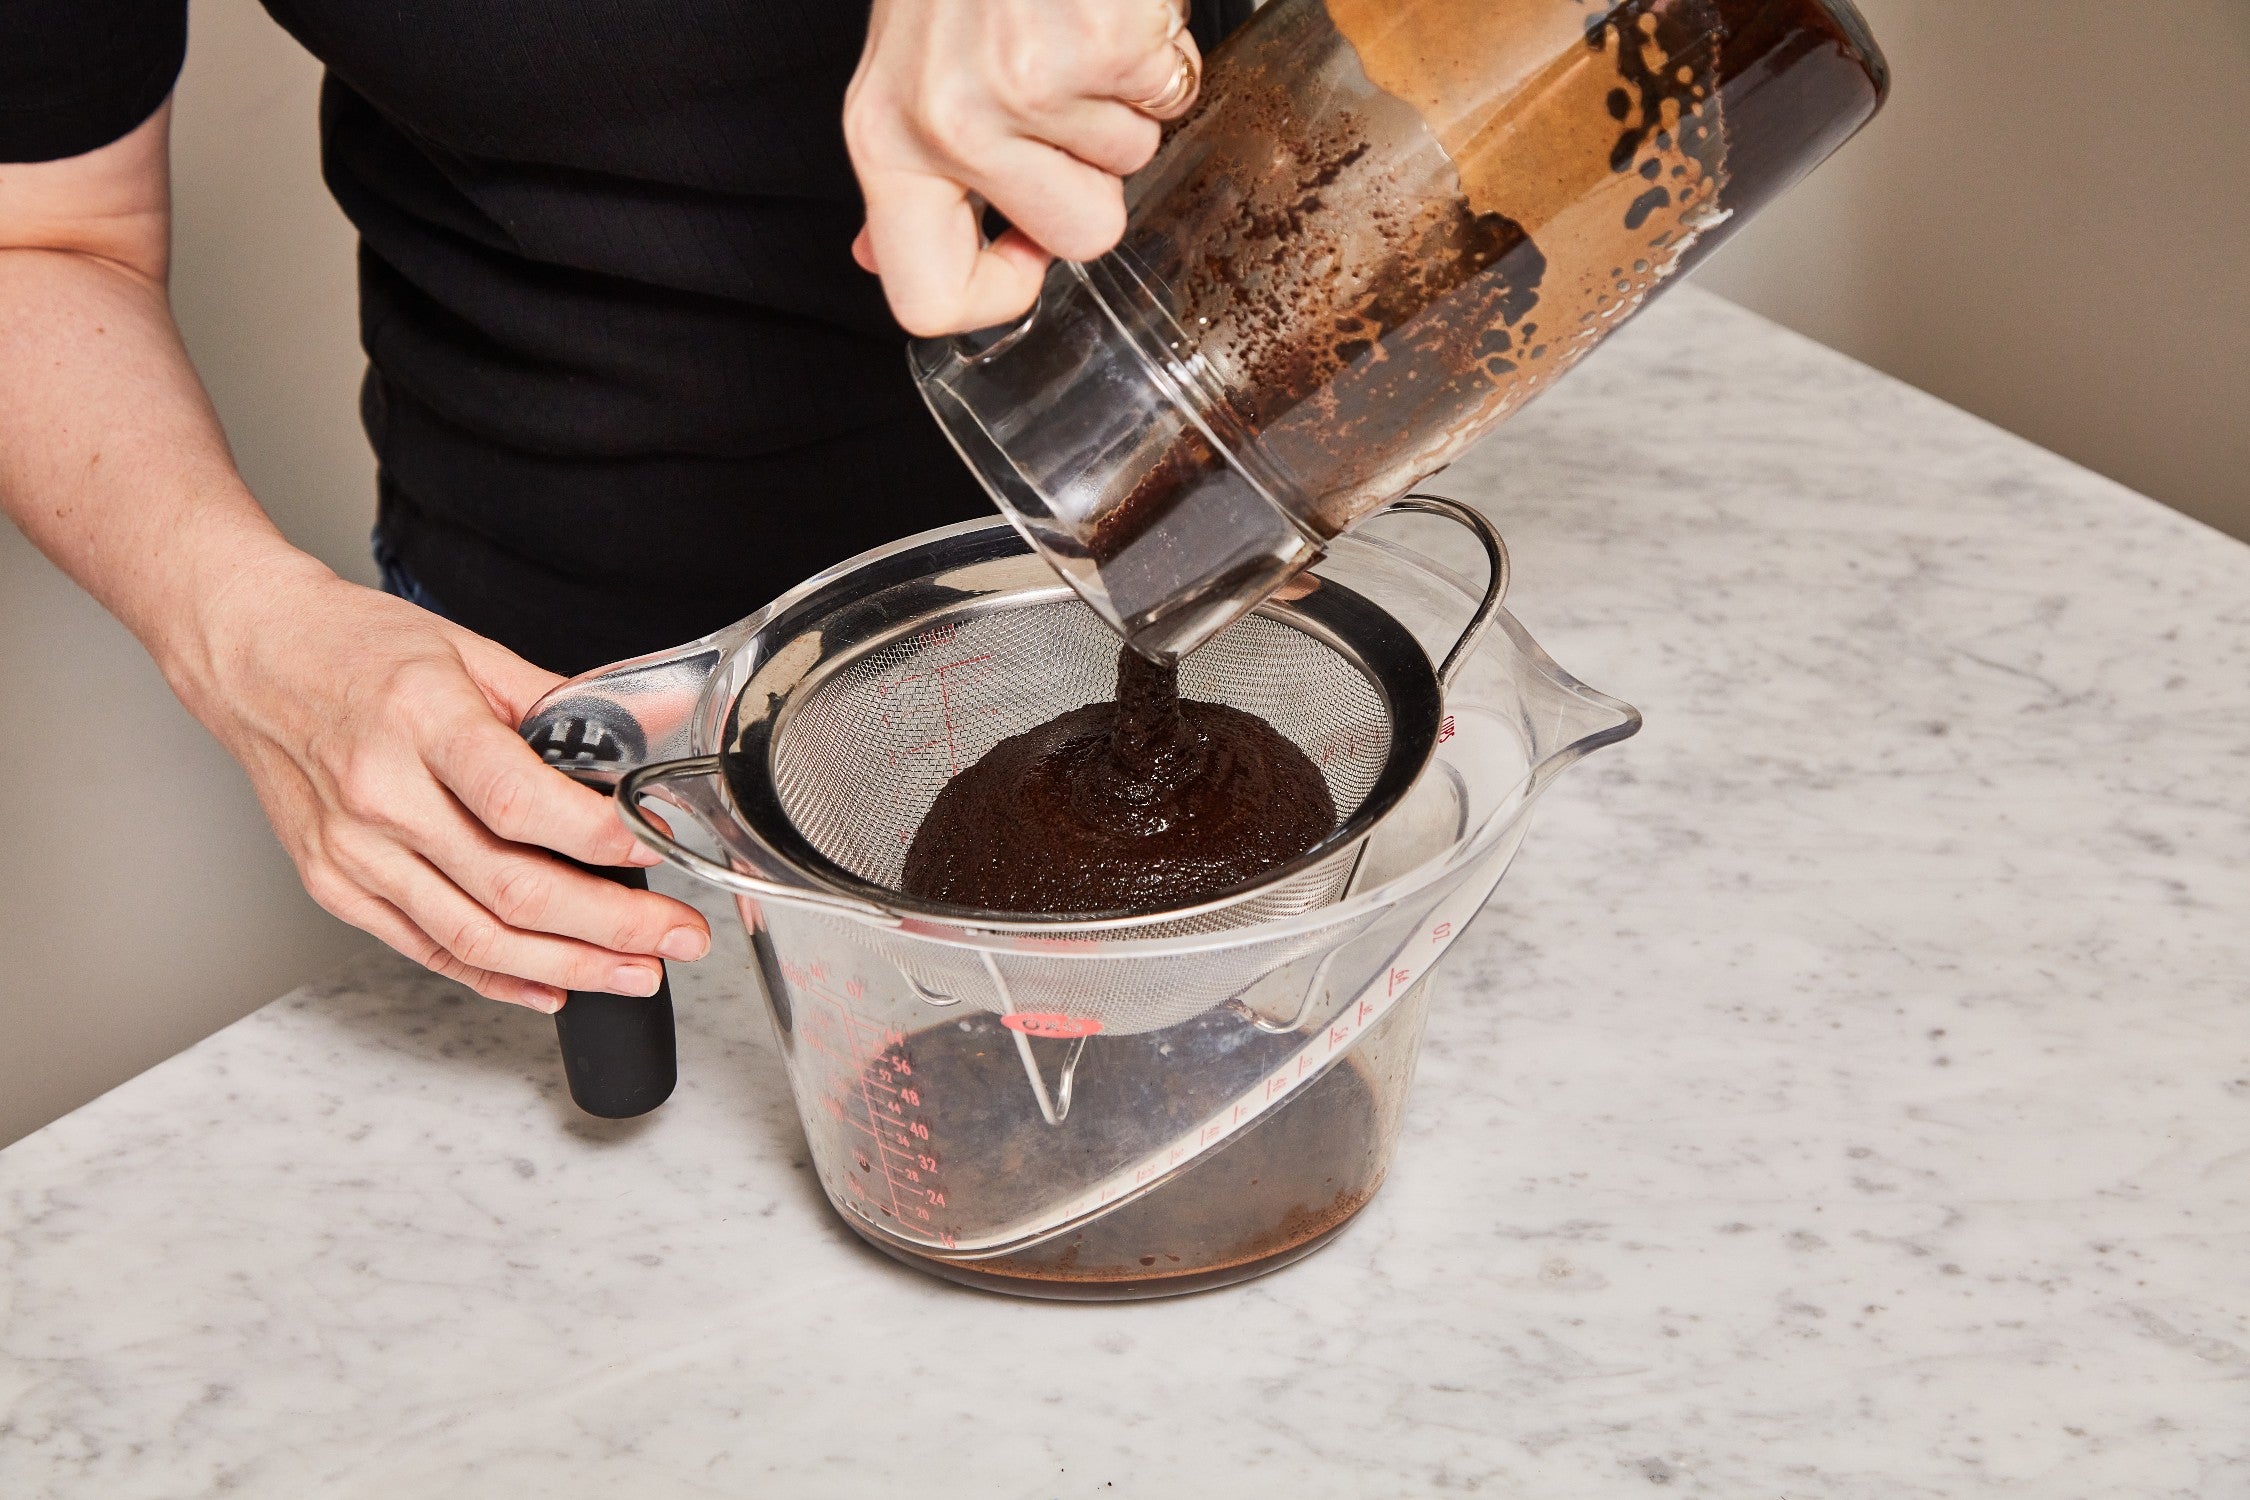 How to Cold Brew Coffee